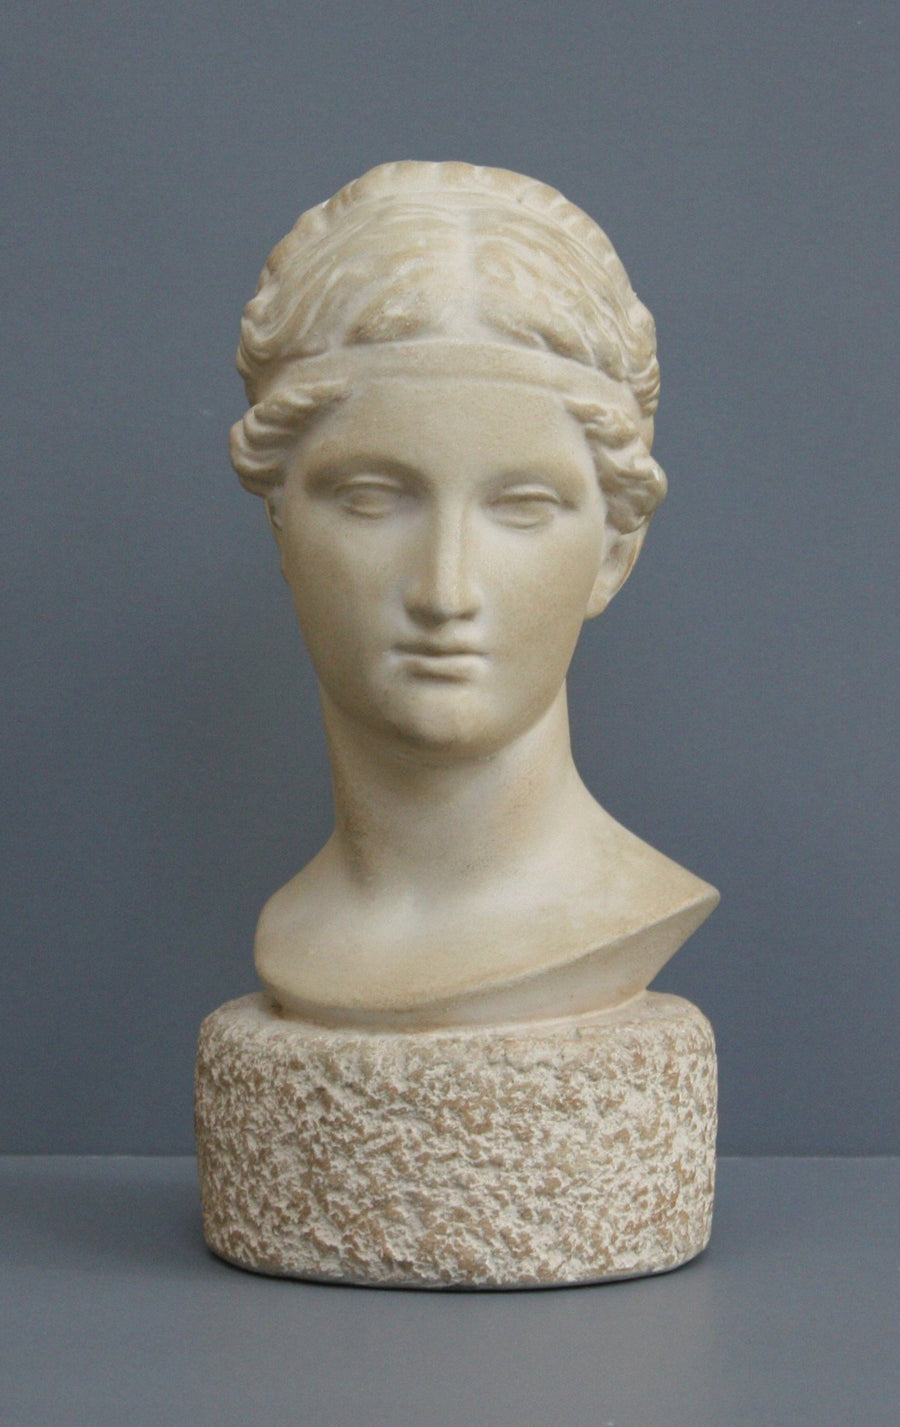 Photo of Plaster Cast sculpture bust of goddess Hebe on a gray background